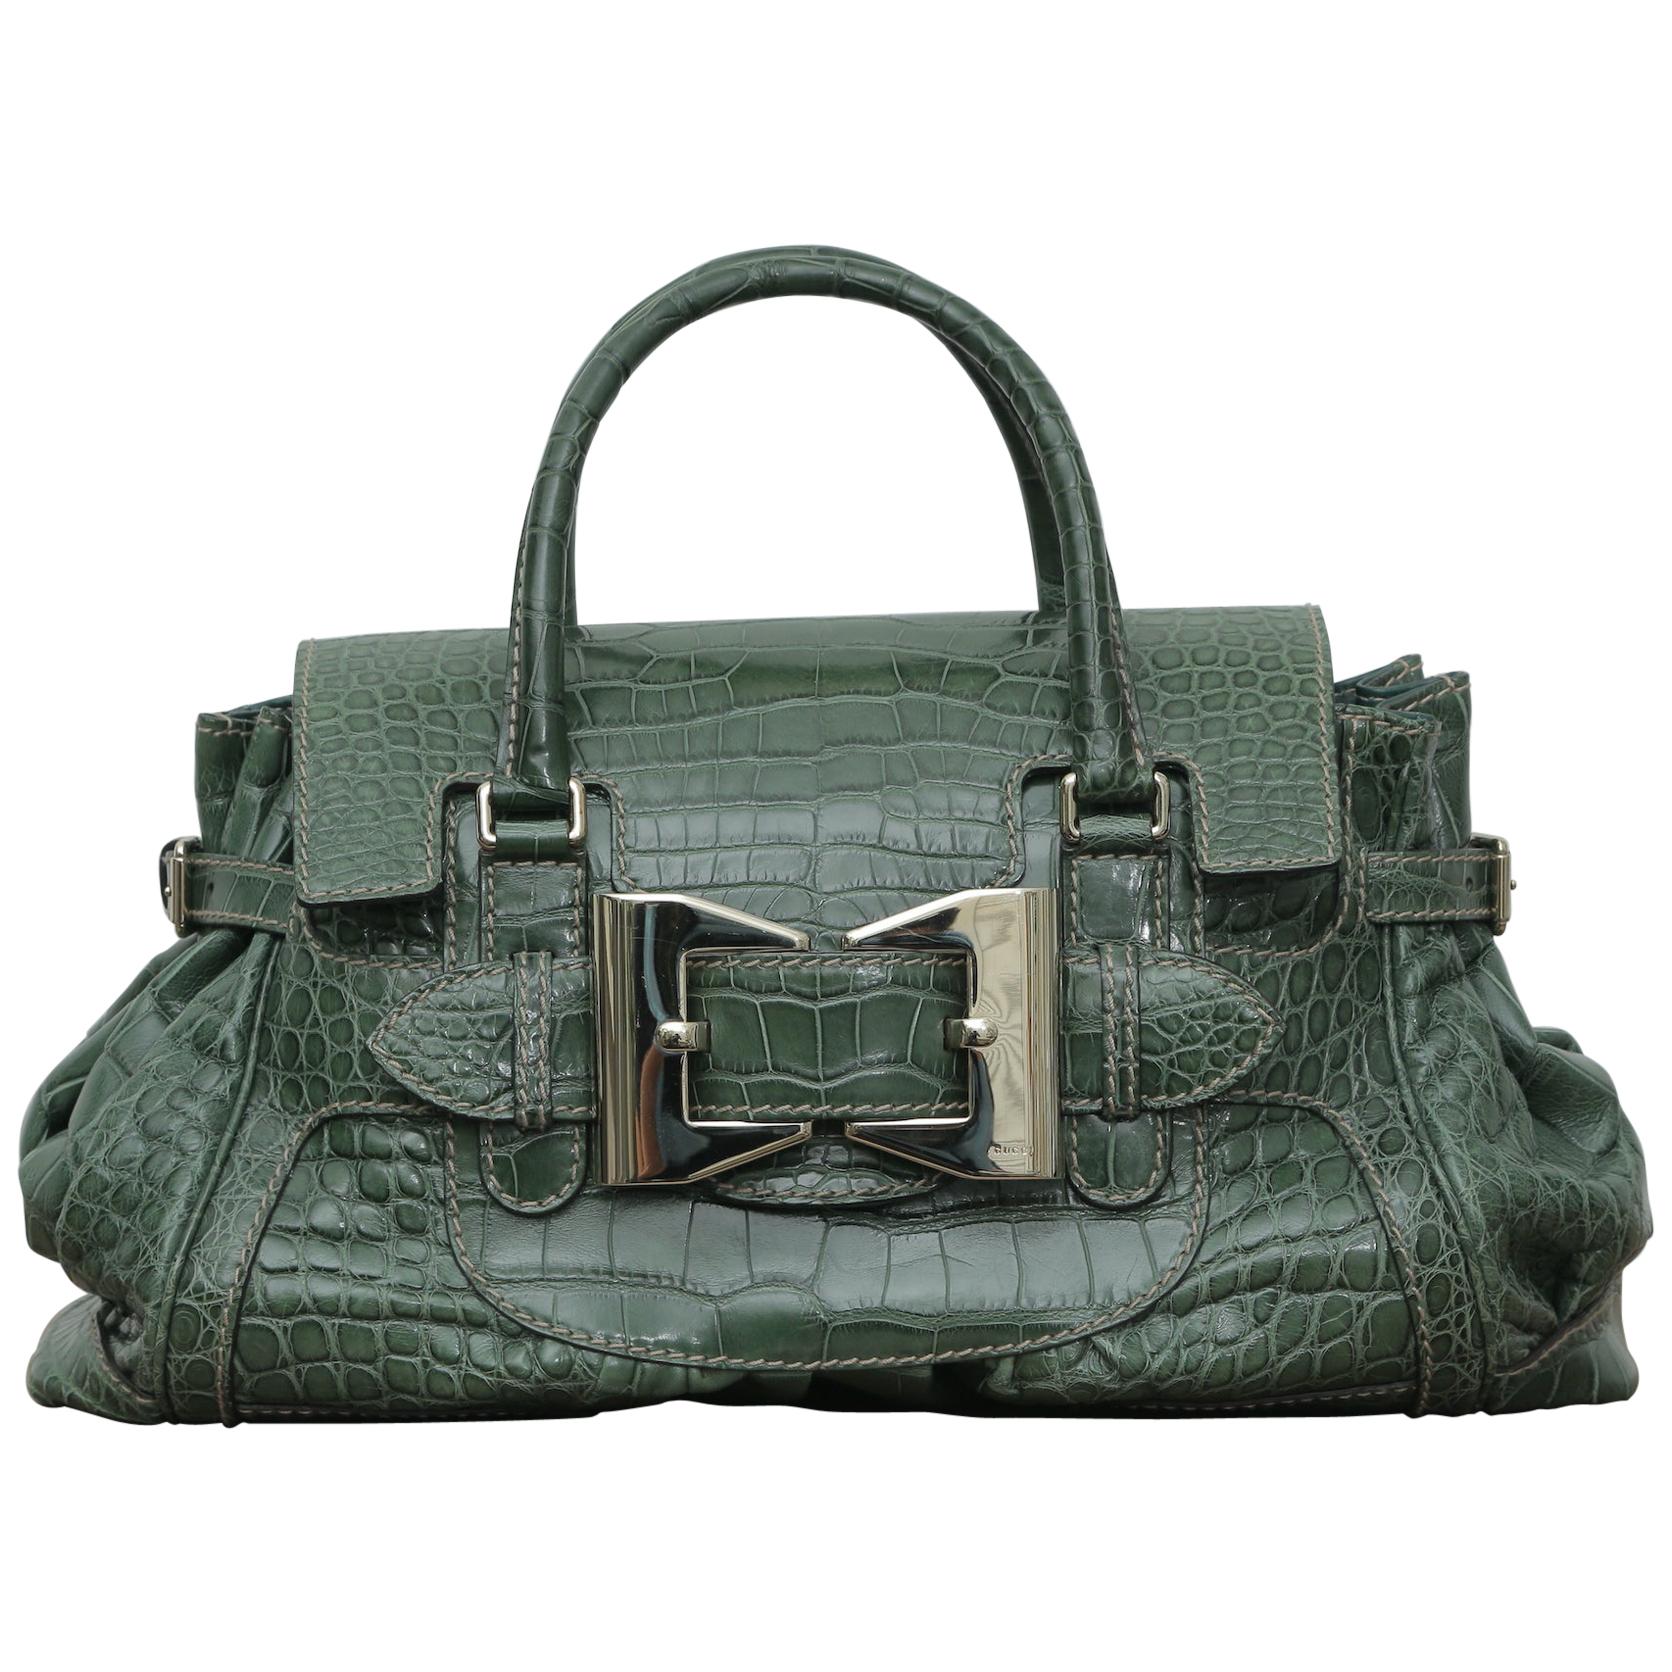  Rare Gucci Limited Edition Green Crocodile Skin Leather Weekend/Travel Bag For Sale